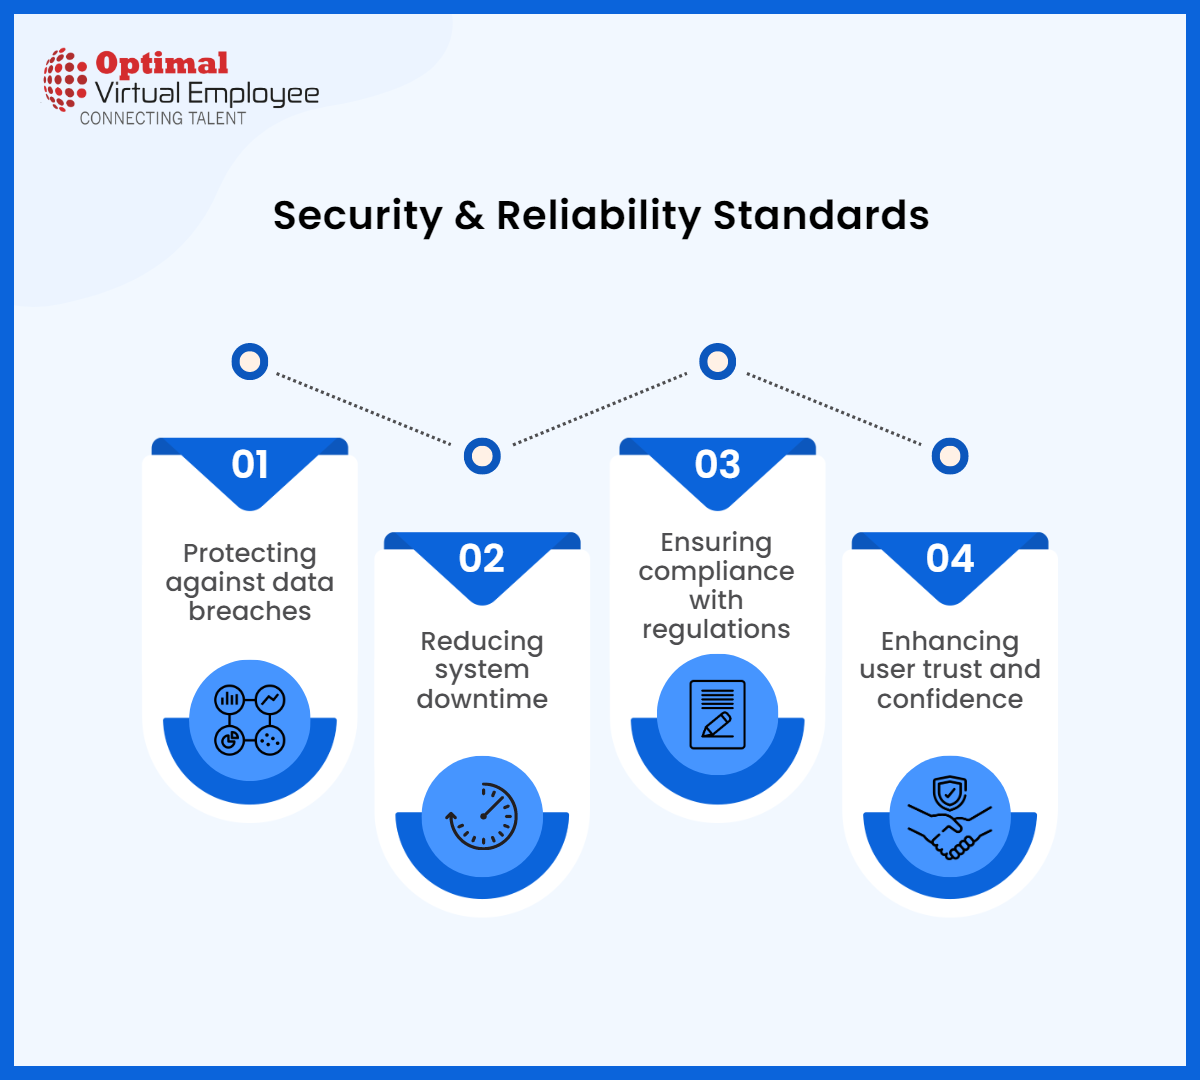 Security & Reliability Standards